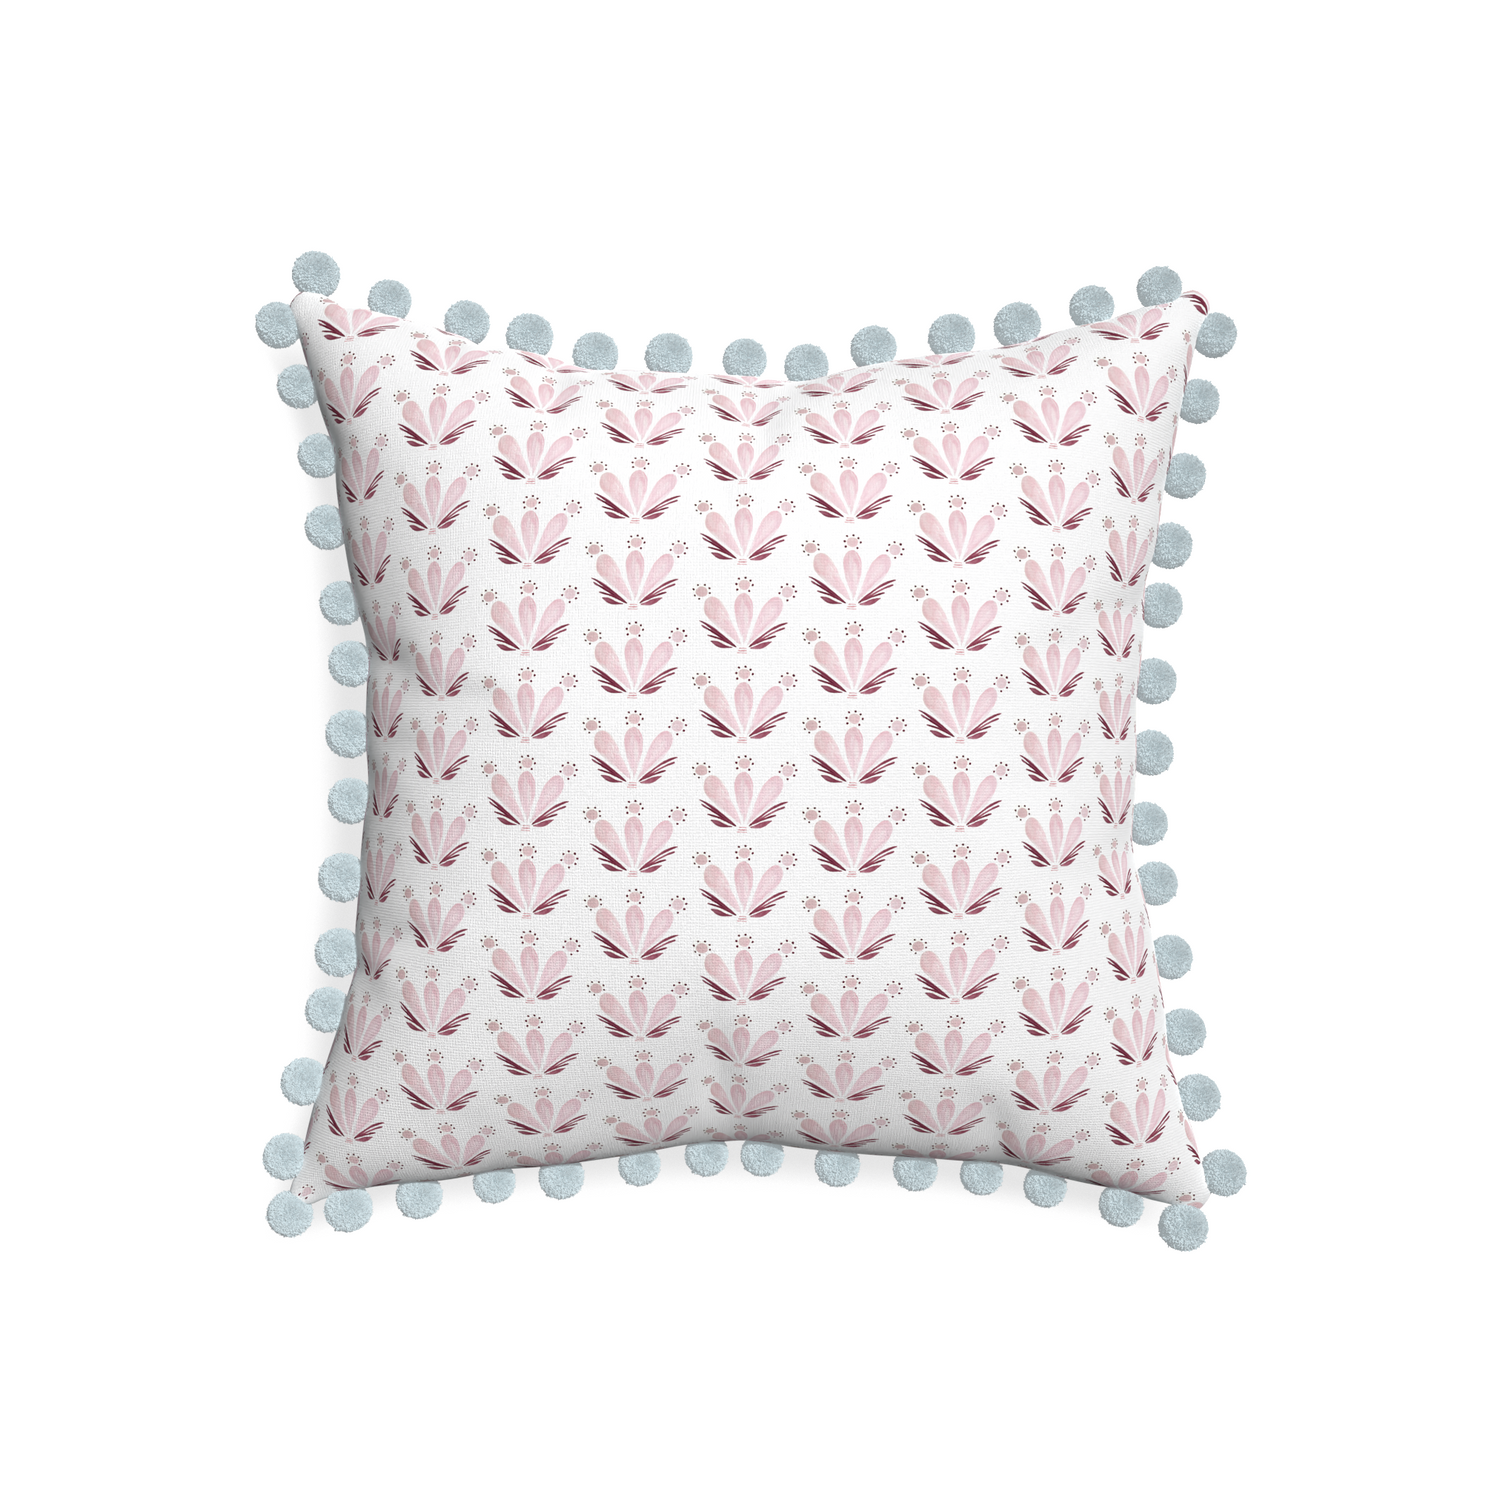 20-square serena pink custom pink & burgundy drop repeat floralpillow with powder pom pom on white background